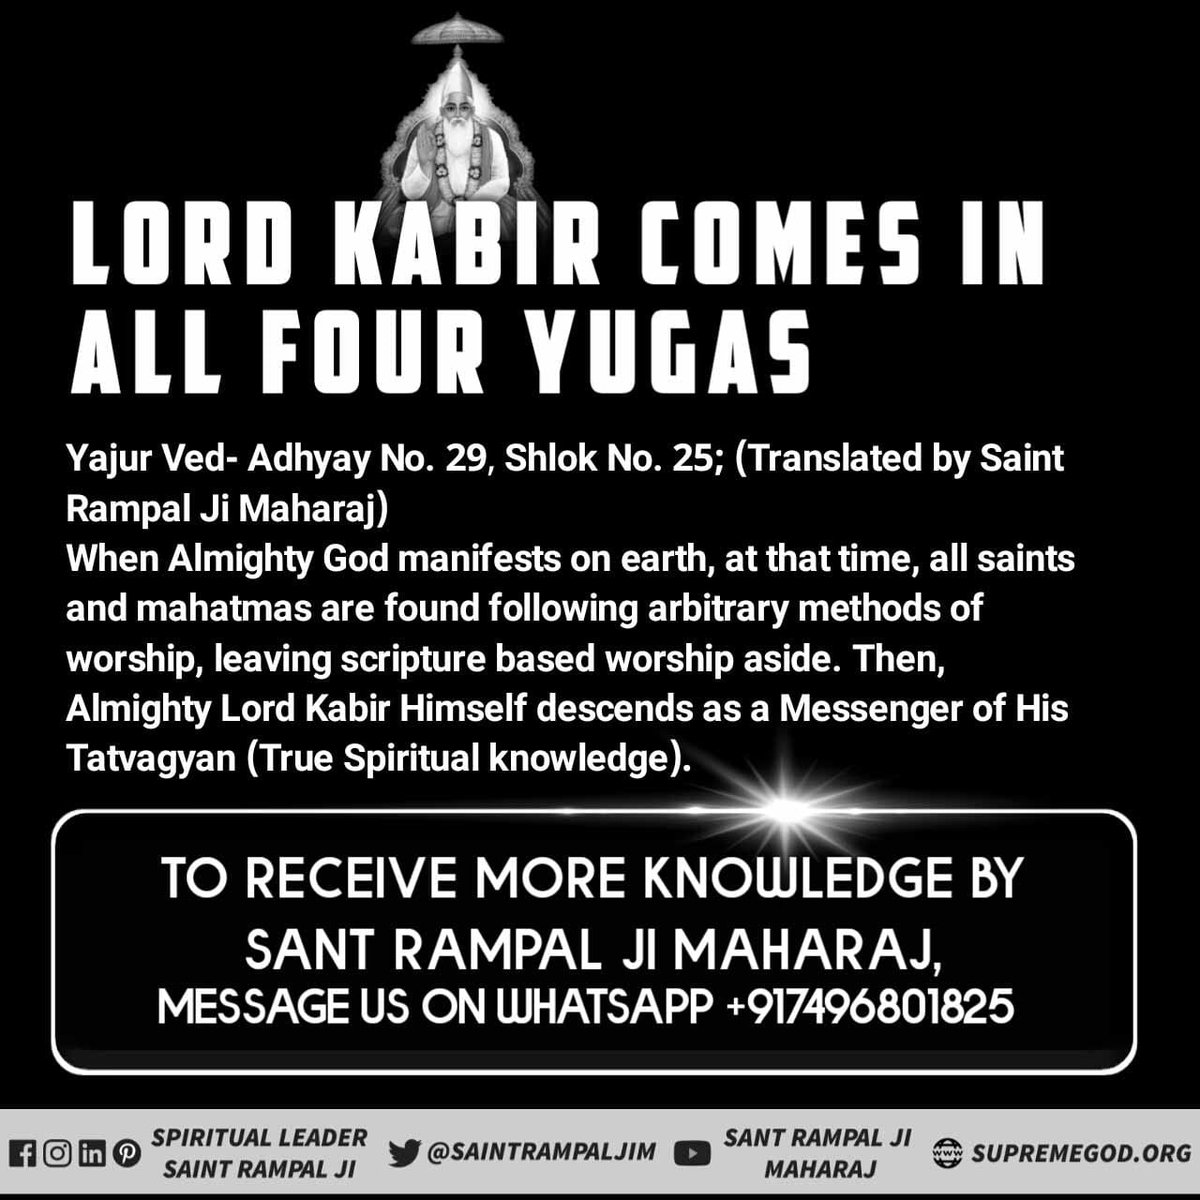 #अविनाशी_परमात्मा_कबीर
Supreme God KavirDev i.e. God Kabir changing His appearance and acquiring appearance of an ordinary man appears on Earth, and 'Kavirnivachnaani shansan' i.e. recites Kavir Vaani, by means of which, brings awareness about the Tatvgyan.